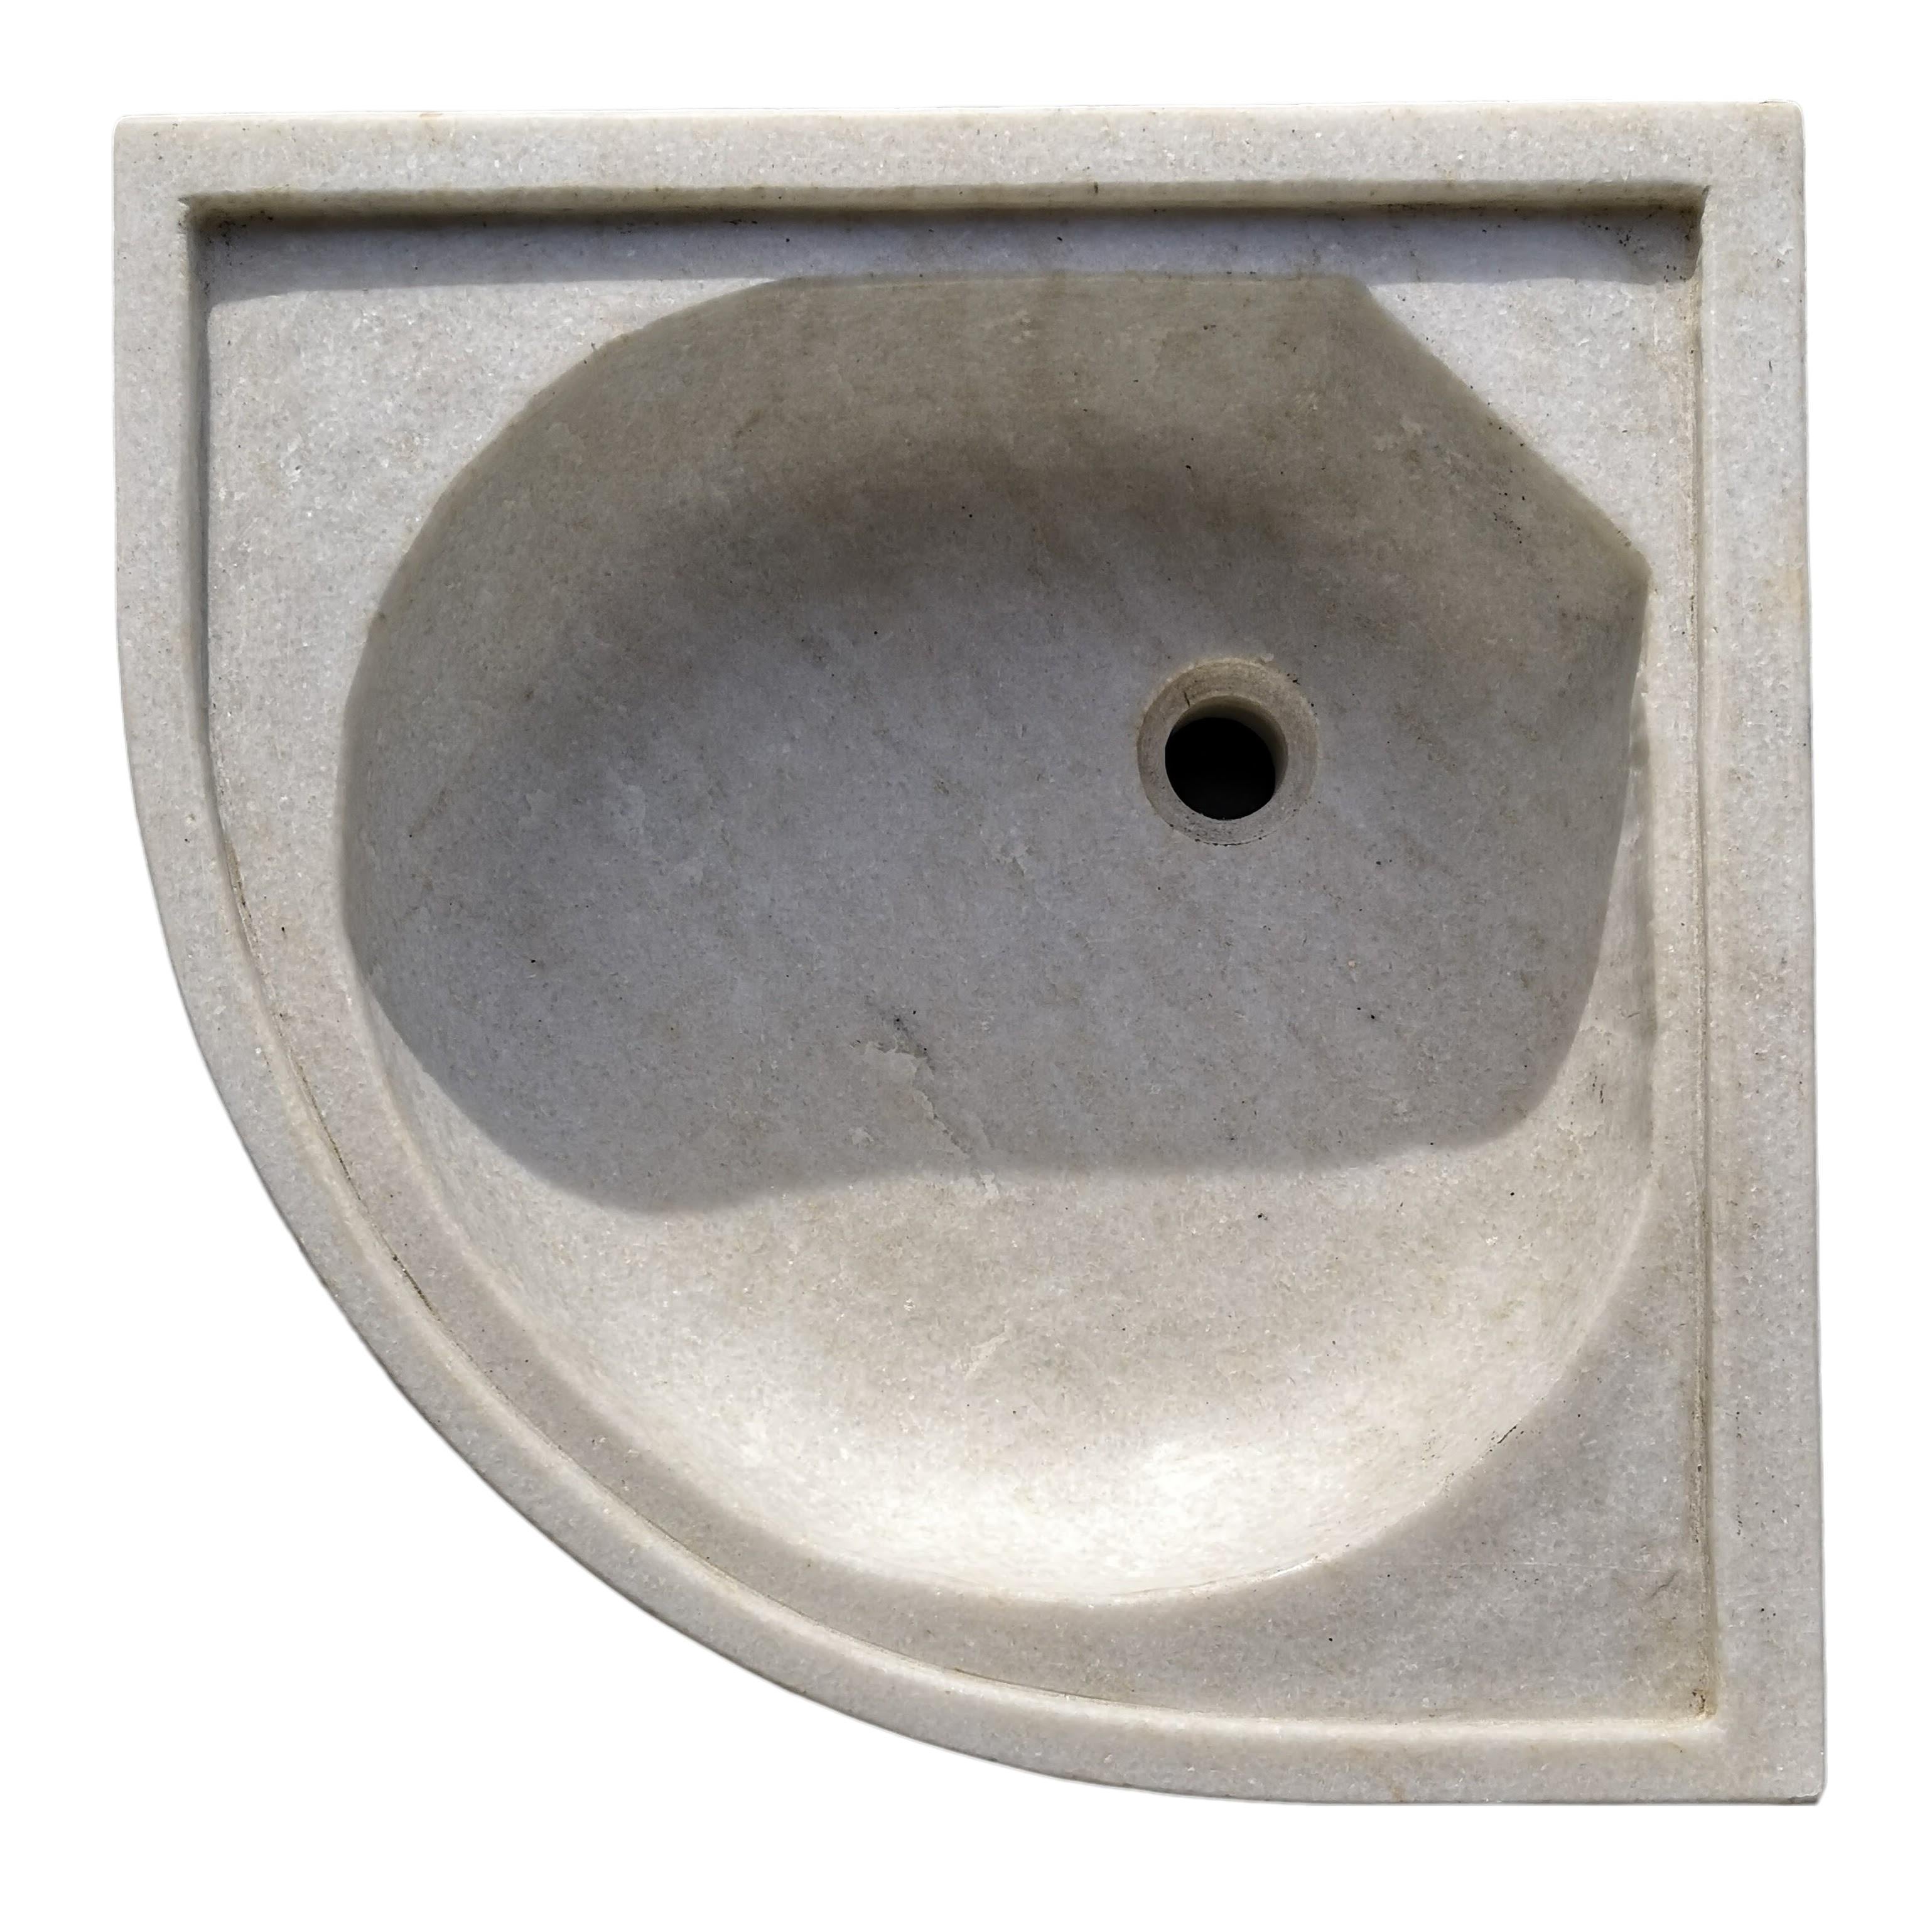 Classical Italian corner sink basin cut from one single block of white marble, these Greek/Roman designs quite happily suit either old or new properties.
55 kg

Custom sizing available if needed